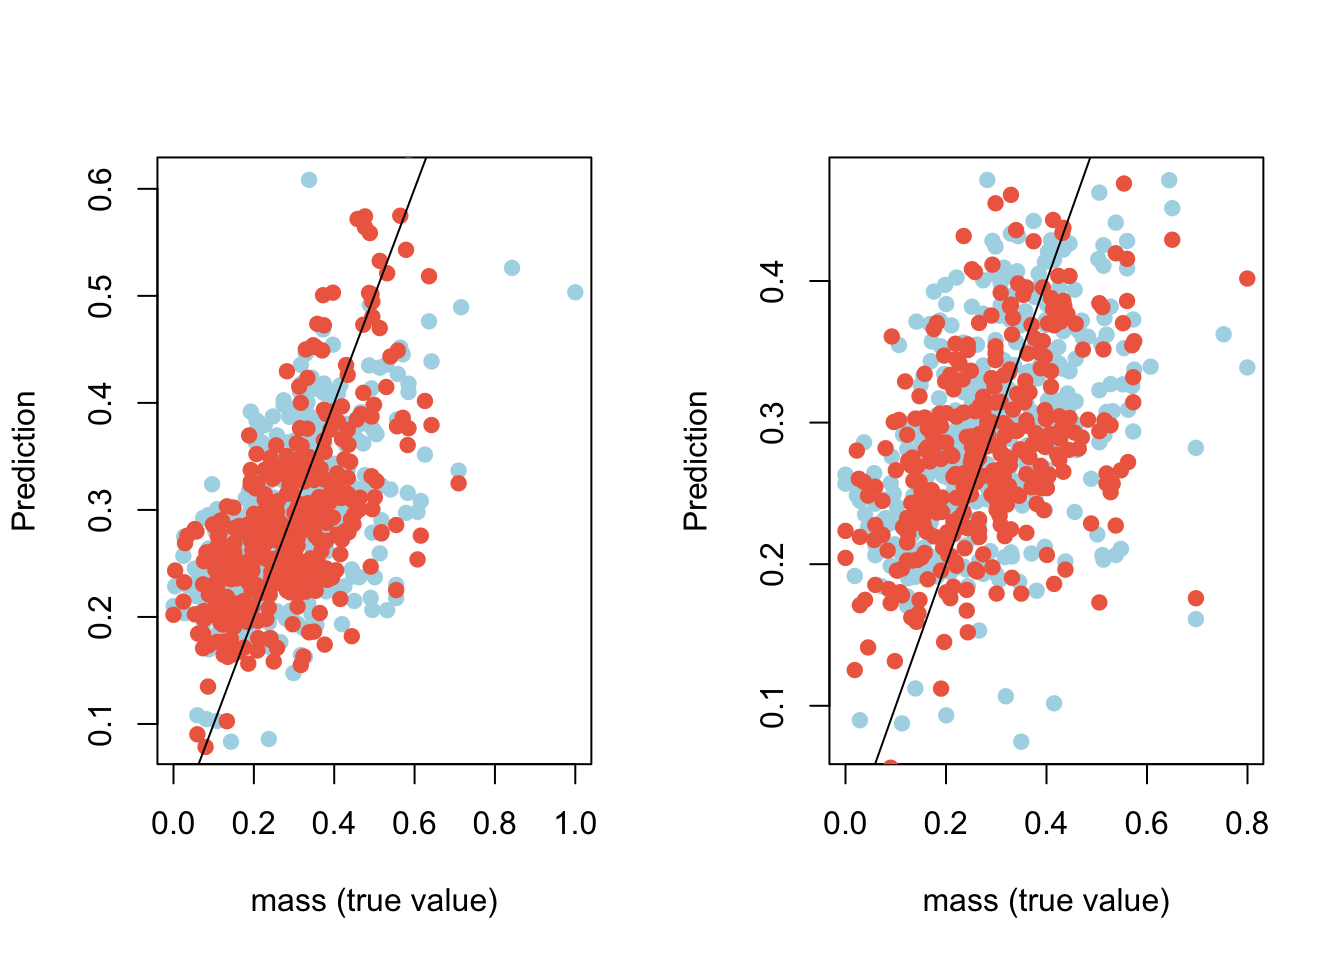 Comparison of predicted values vs. known values with linear regression (blue) and ANN (red) on the training data set (left) and on the test data set (right)